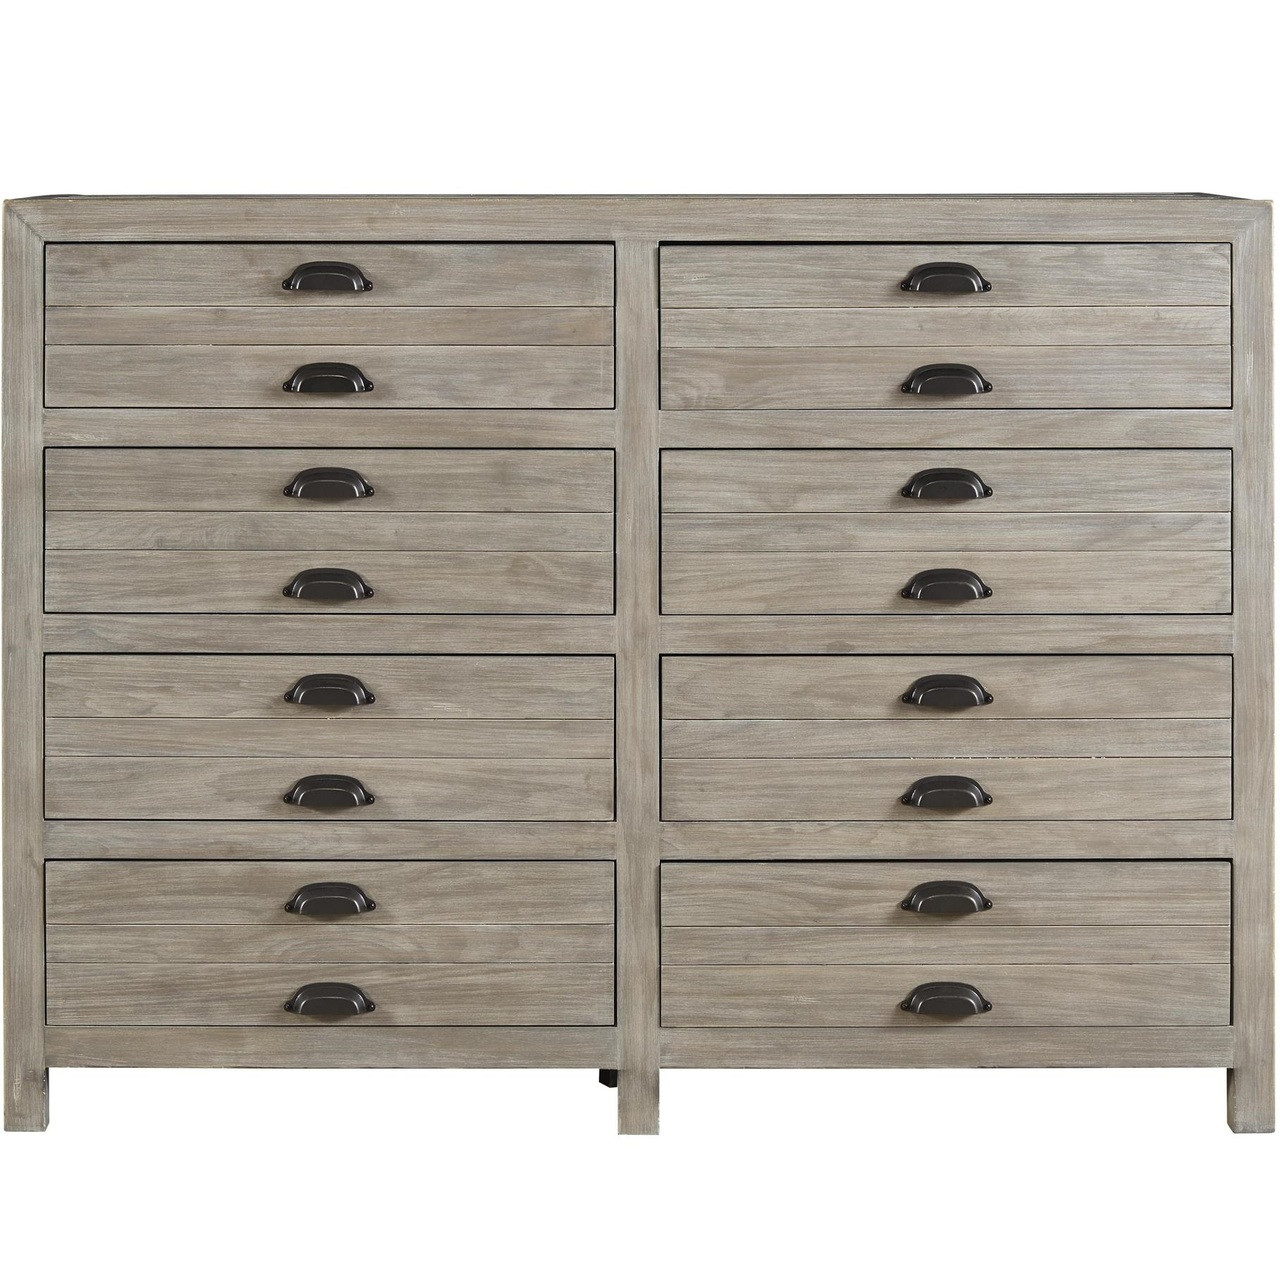 French Printer S Rustic Gray Wood Wide 8 Drawer Dresser Zin Home